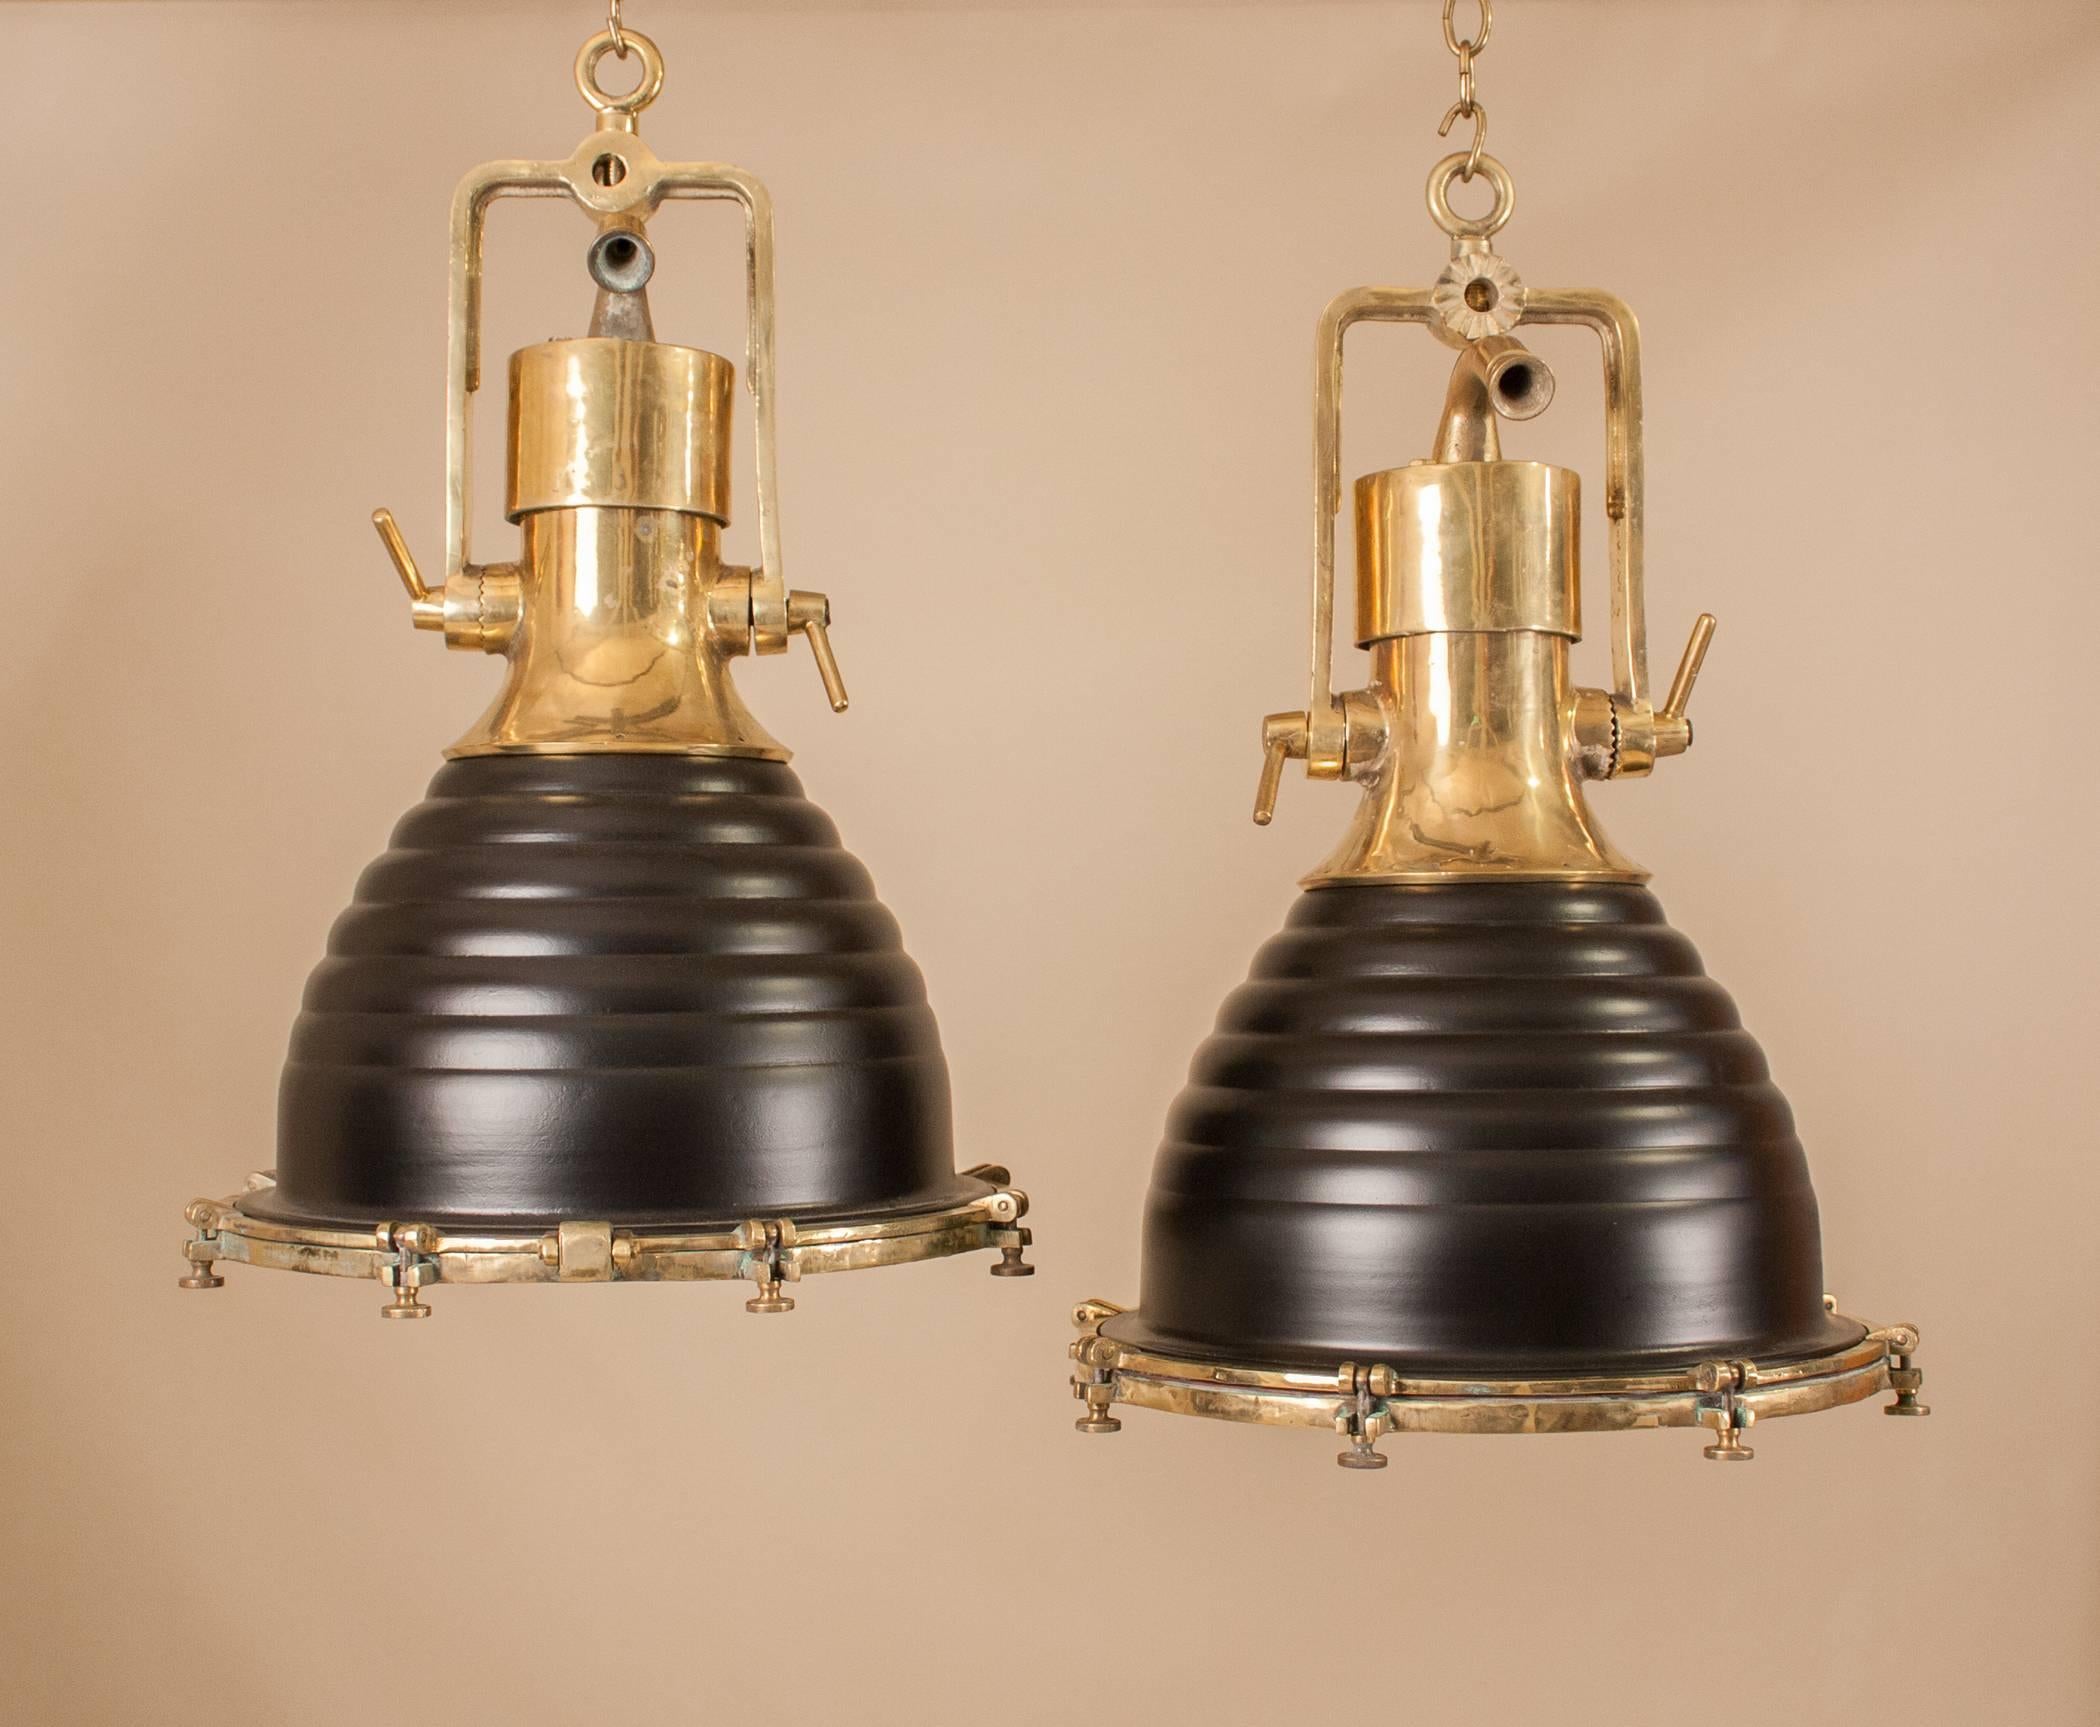 Impressive pair of large nautical ship's deck lights in a combination of polished brass and satin black. These authentic Industrial pendants, manufactured by Wiska, Germany in the 1960s, feature professionally painted original beehive shades, solid